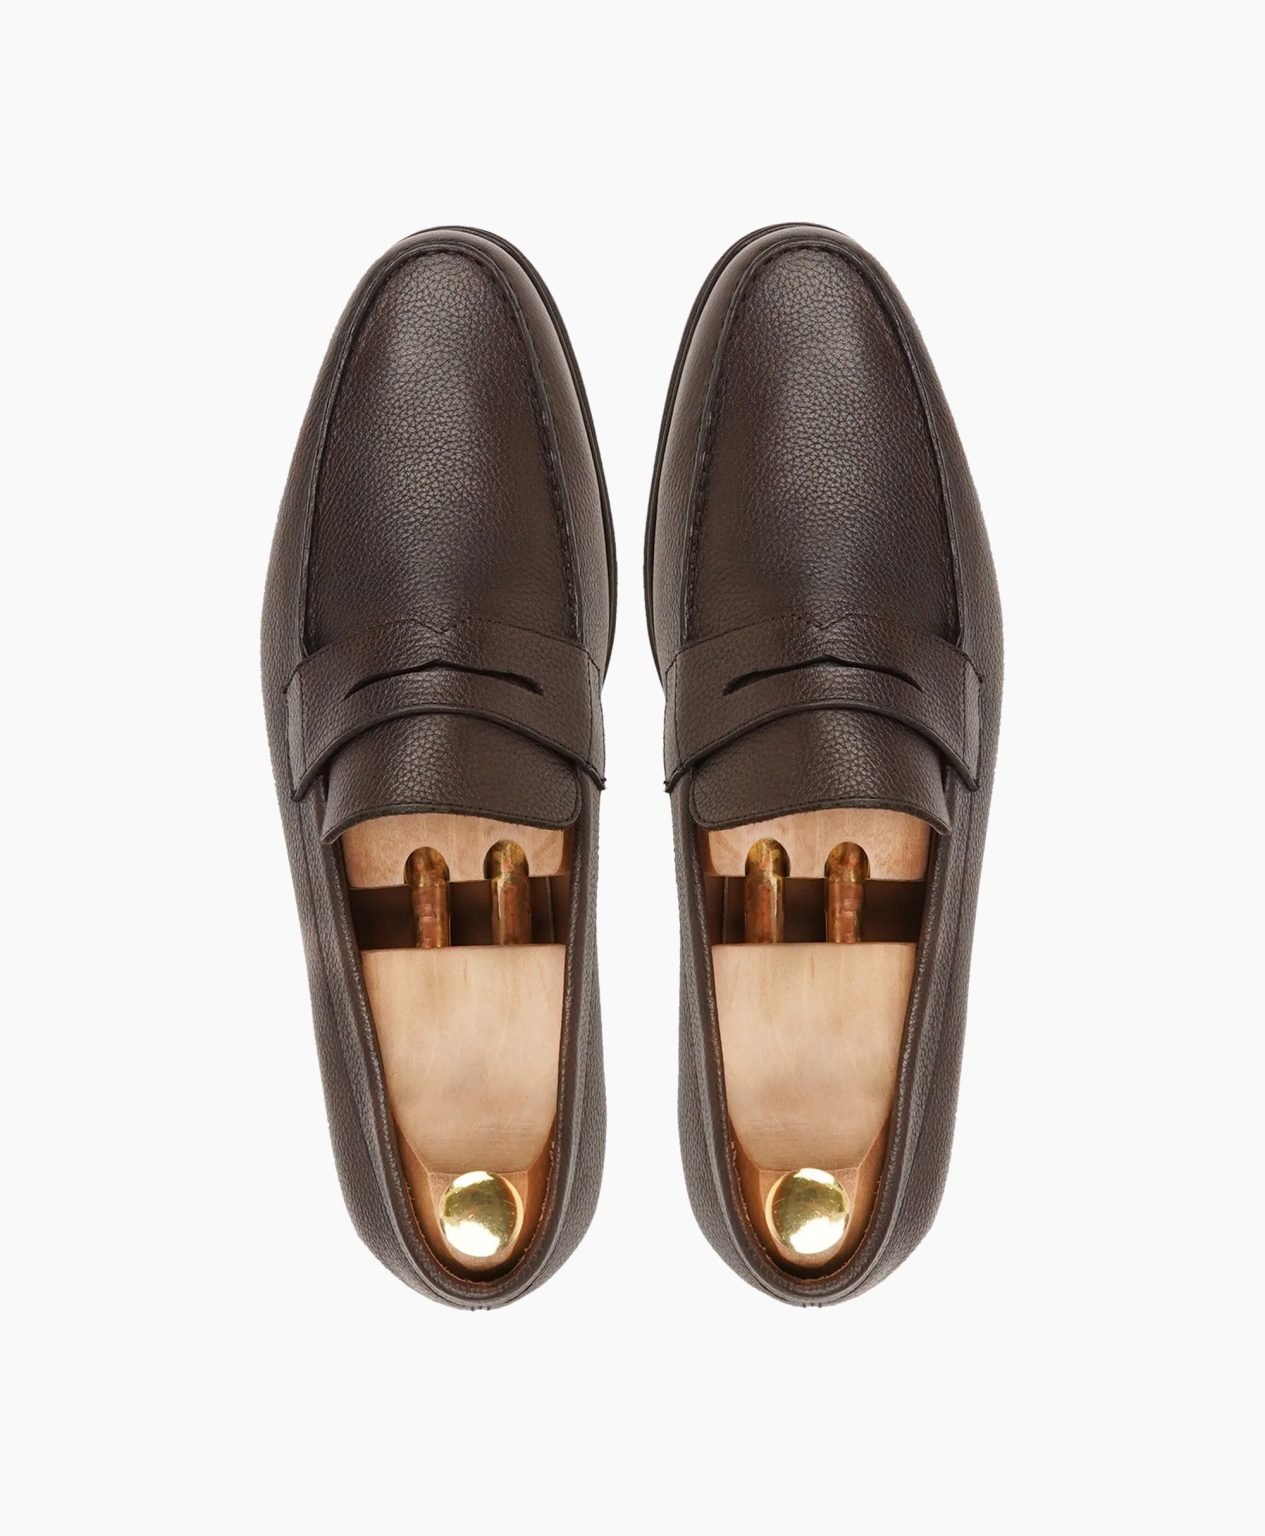 lynton-dark-brown-leather-loafers-image202